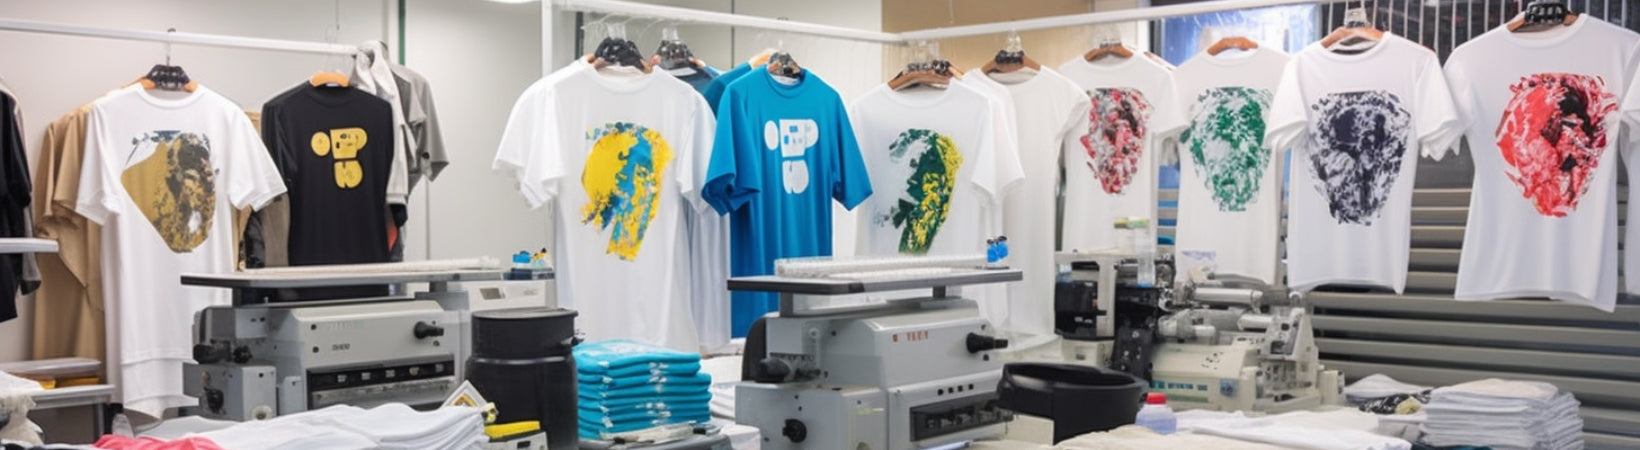 Hanging t-shirt in printing place